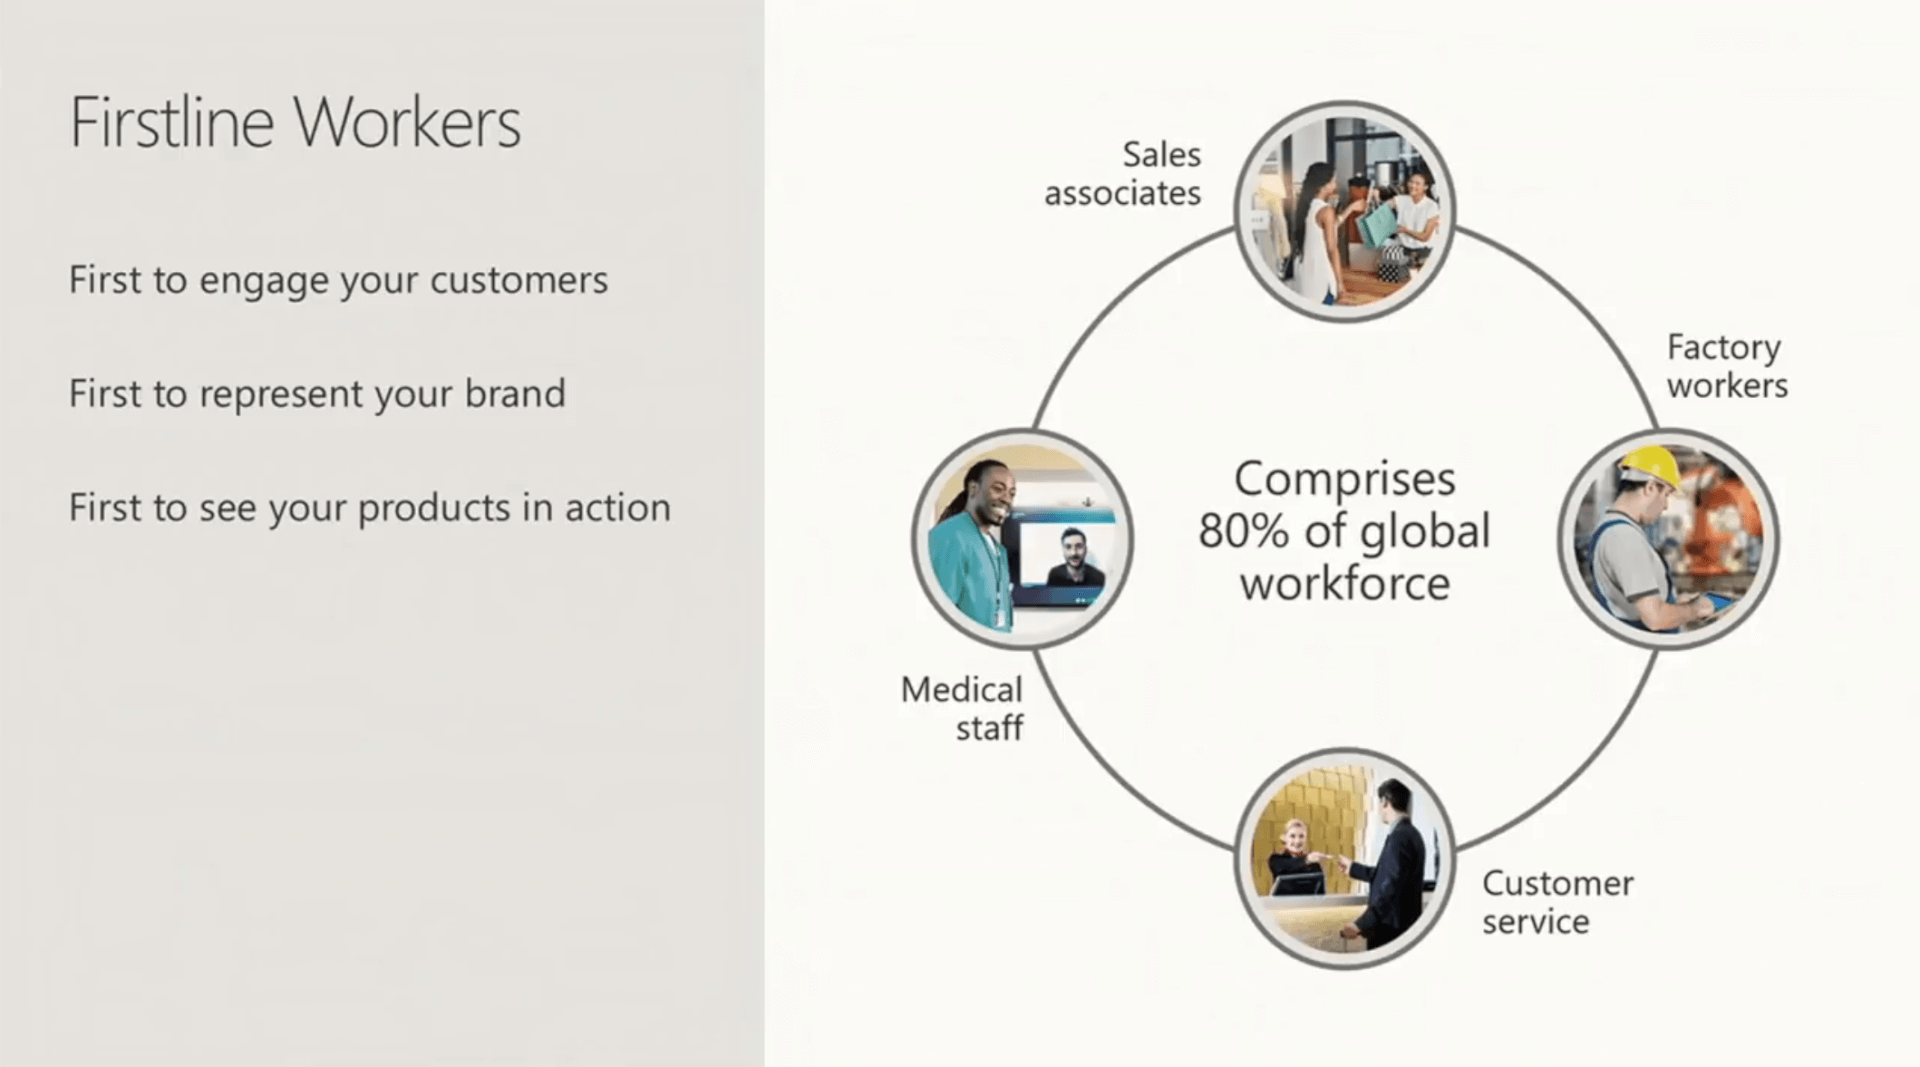 Texte de remplacement généré par une machine : Firstline Workers First to engage your customers First to represent your brand First to see your products in action Sales associates Factory workers Medical staff Comprises 80% of global workforce Customer service 